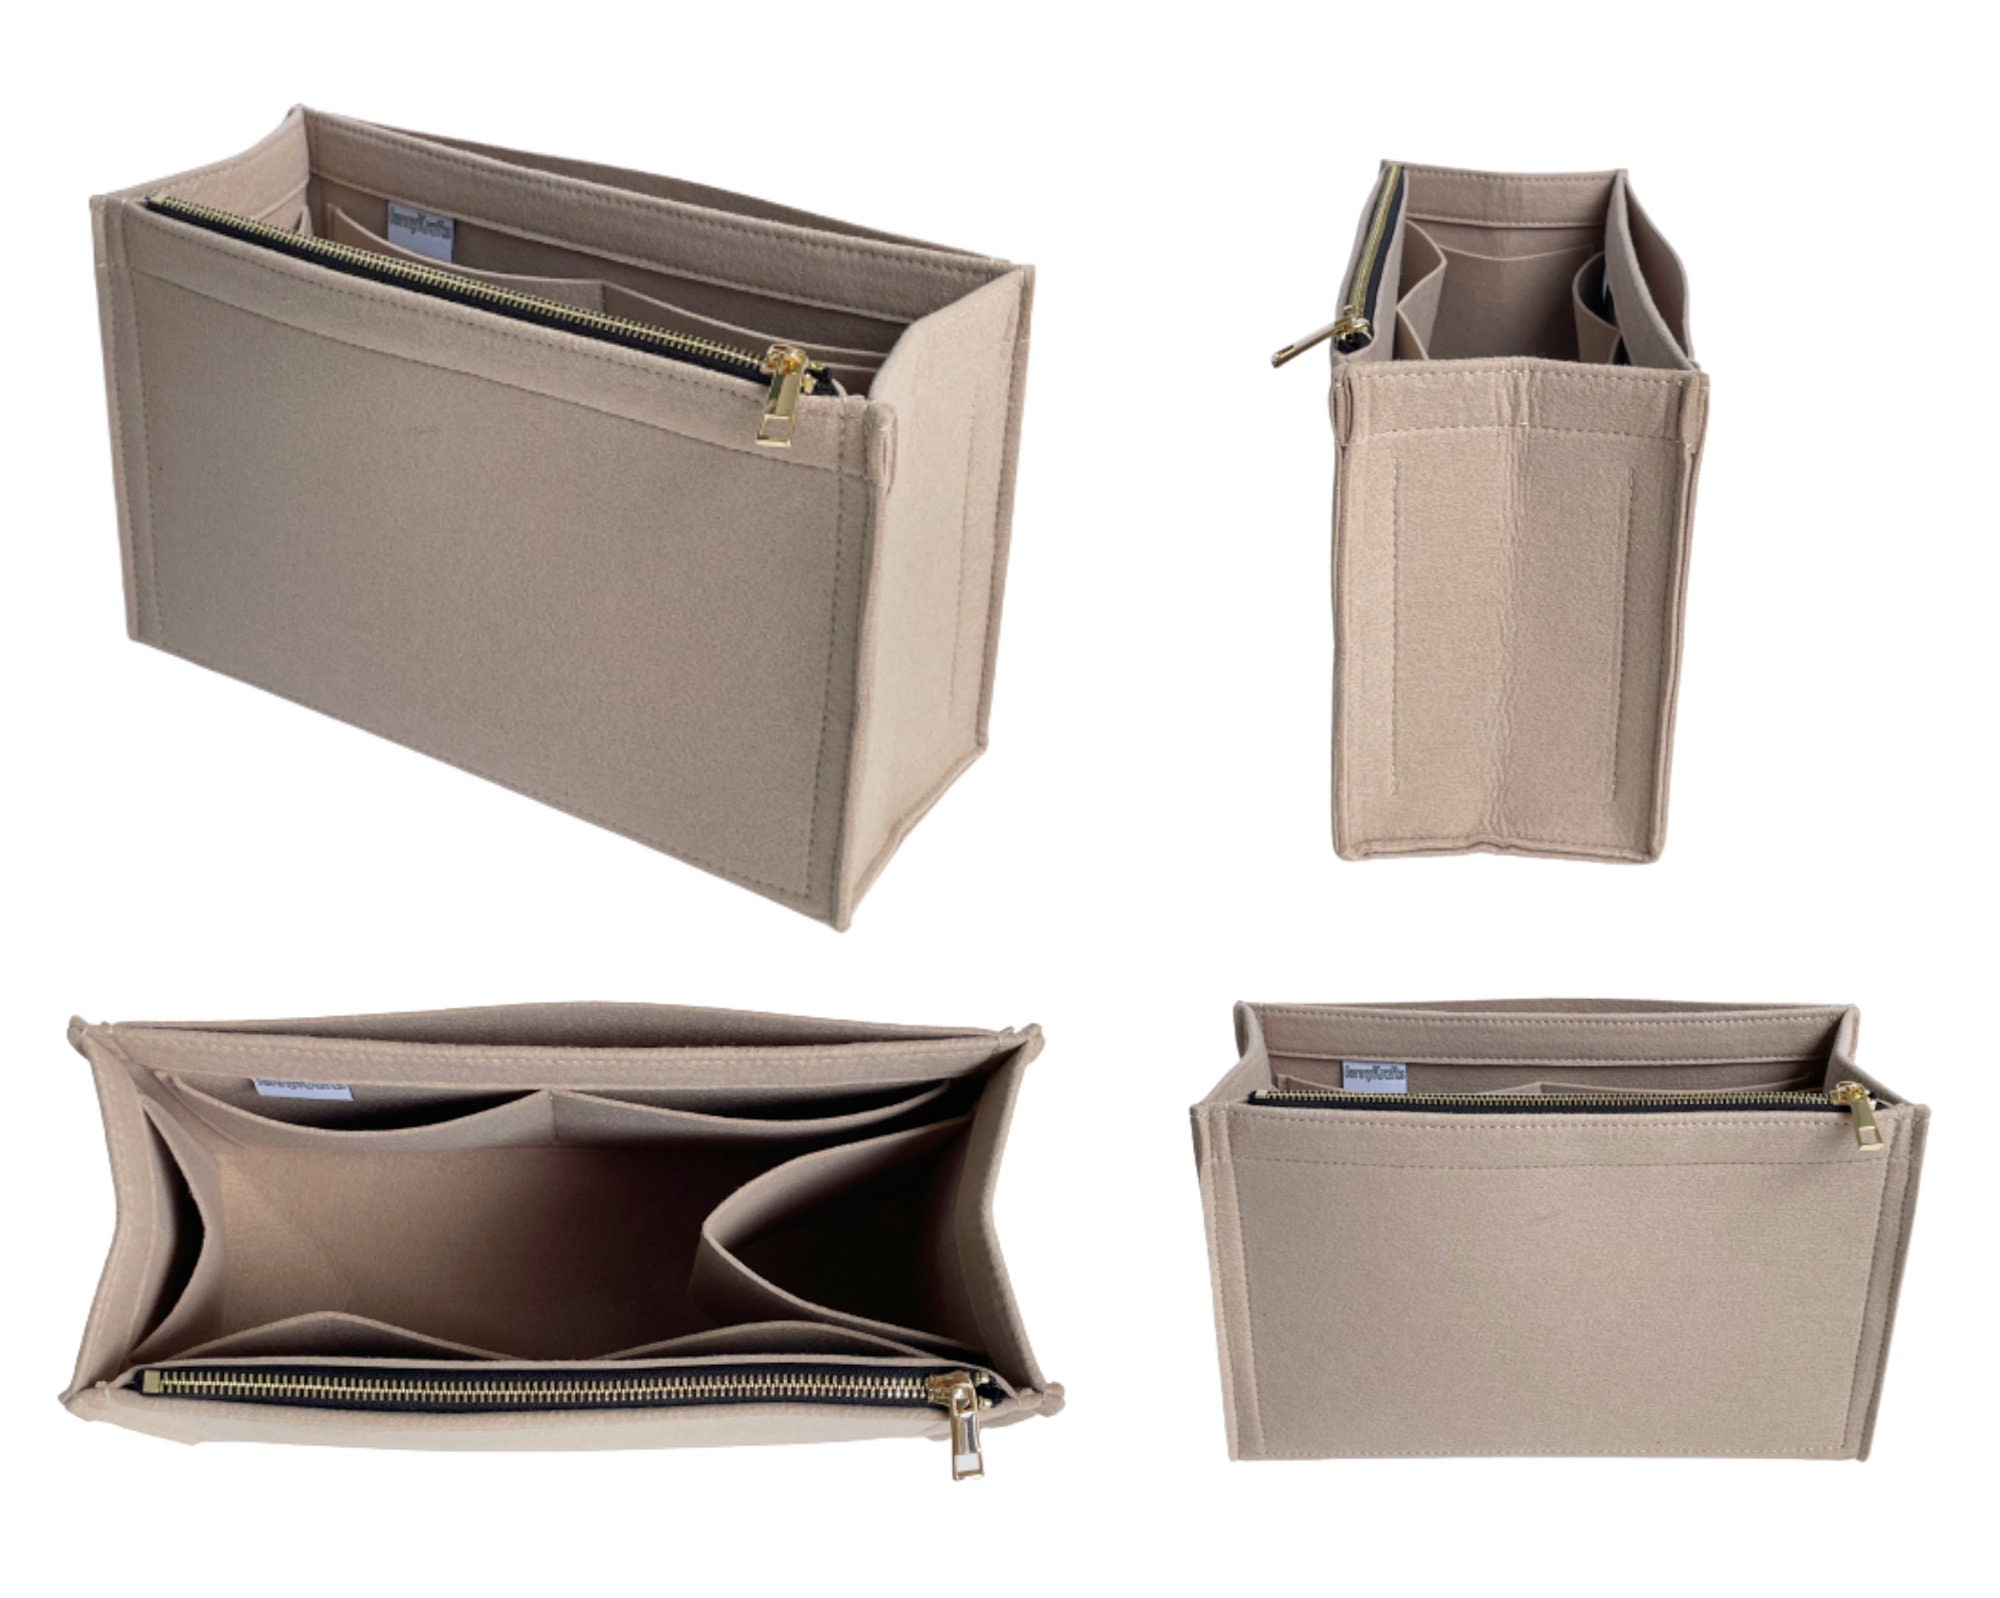 For [Onthego PM] Liner Insert Organizer On The Go OTG (Style B)